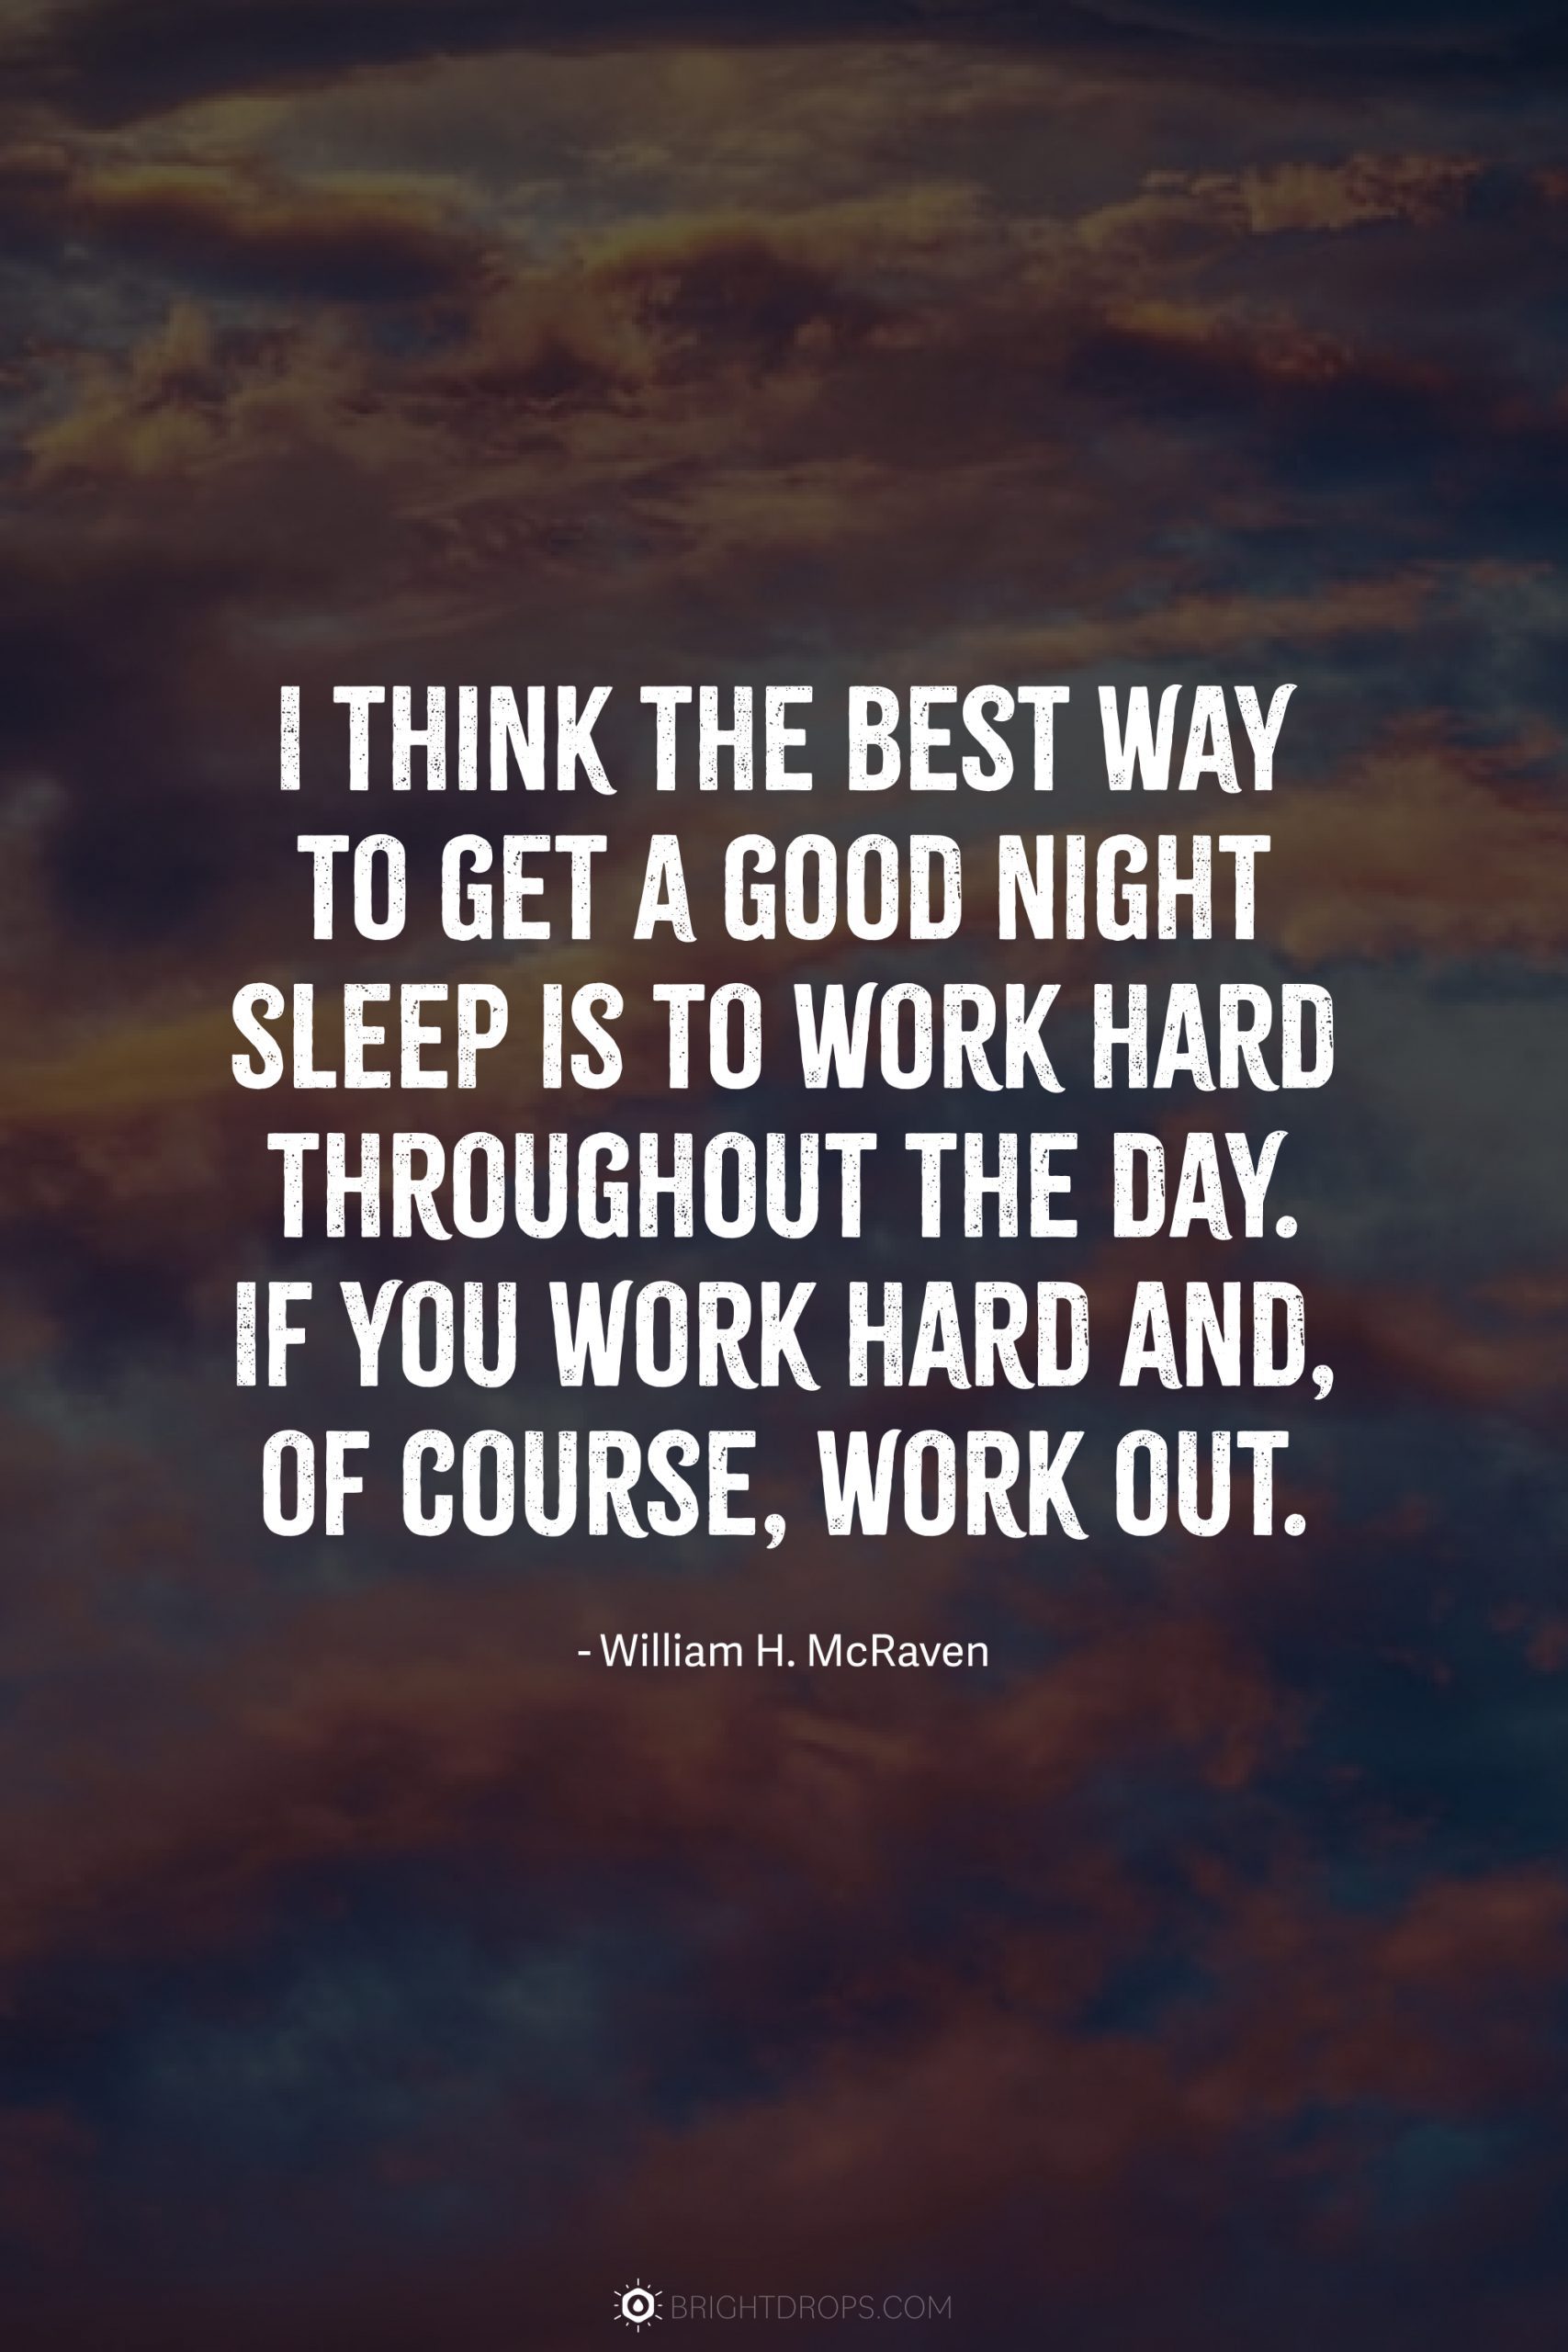 I think the best way to get a good night sleep is to work hard throughout the day. If you work hard and, of course, work out.